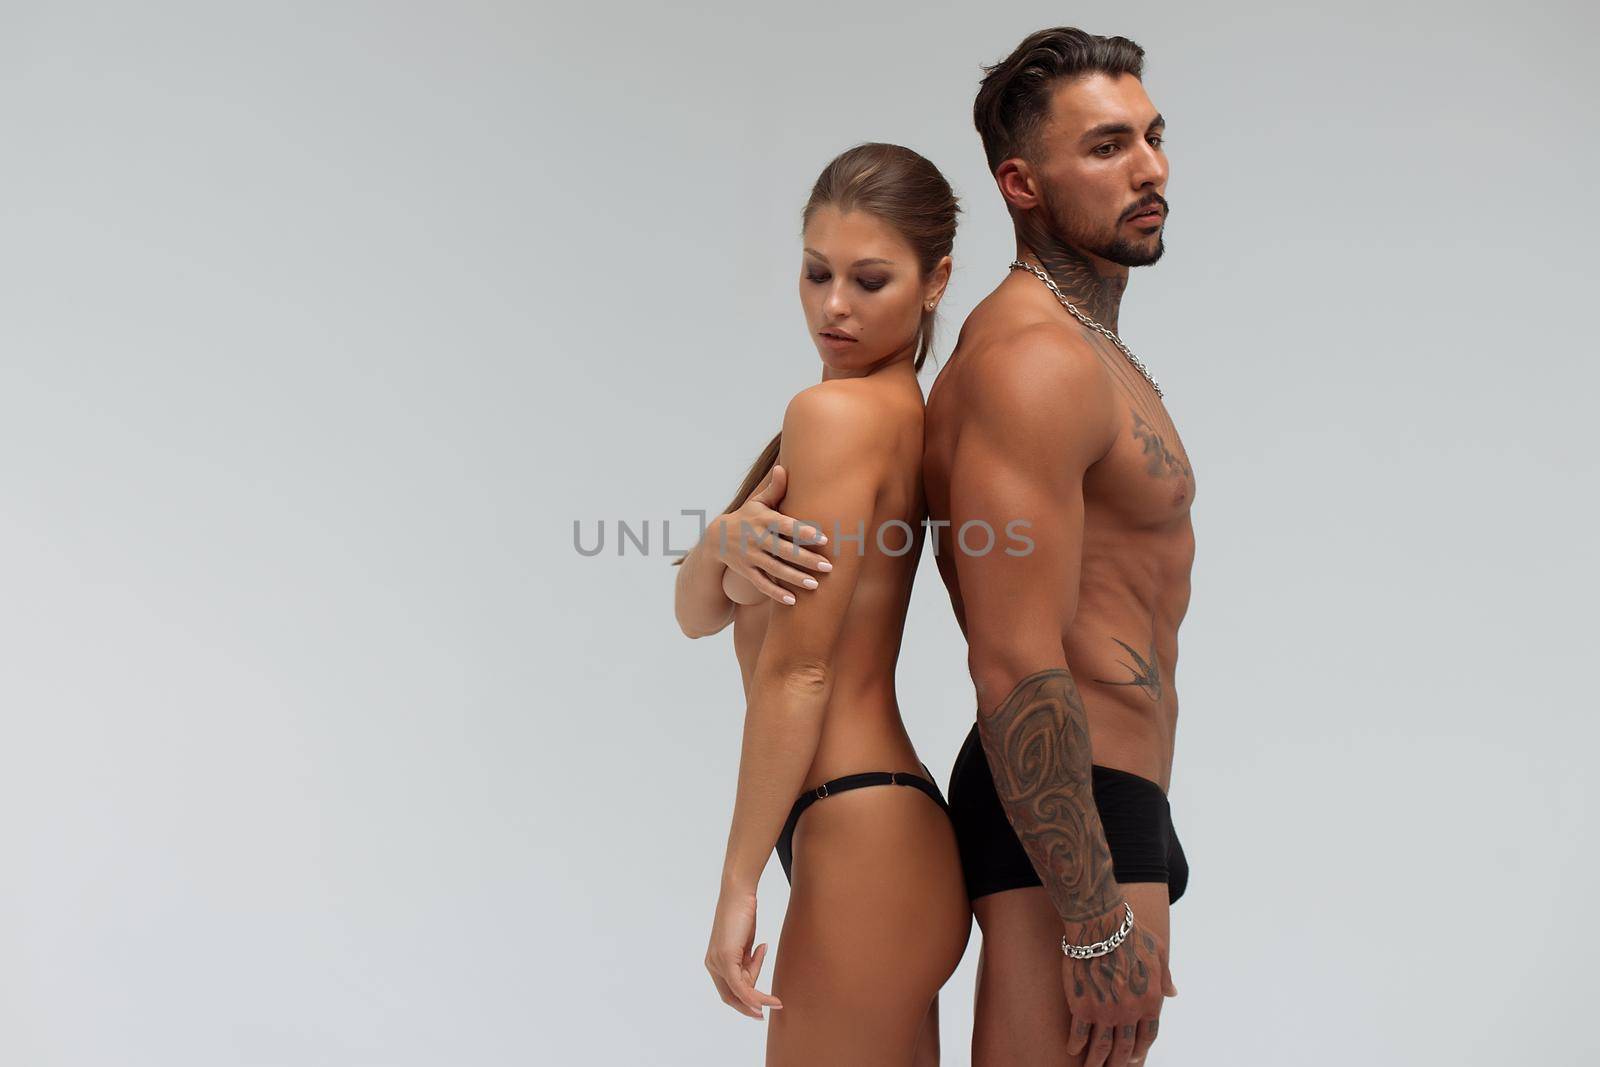 Muscular tattooed man embracing slim topless woman in panties on gray background